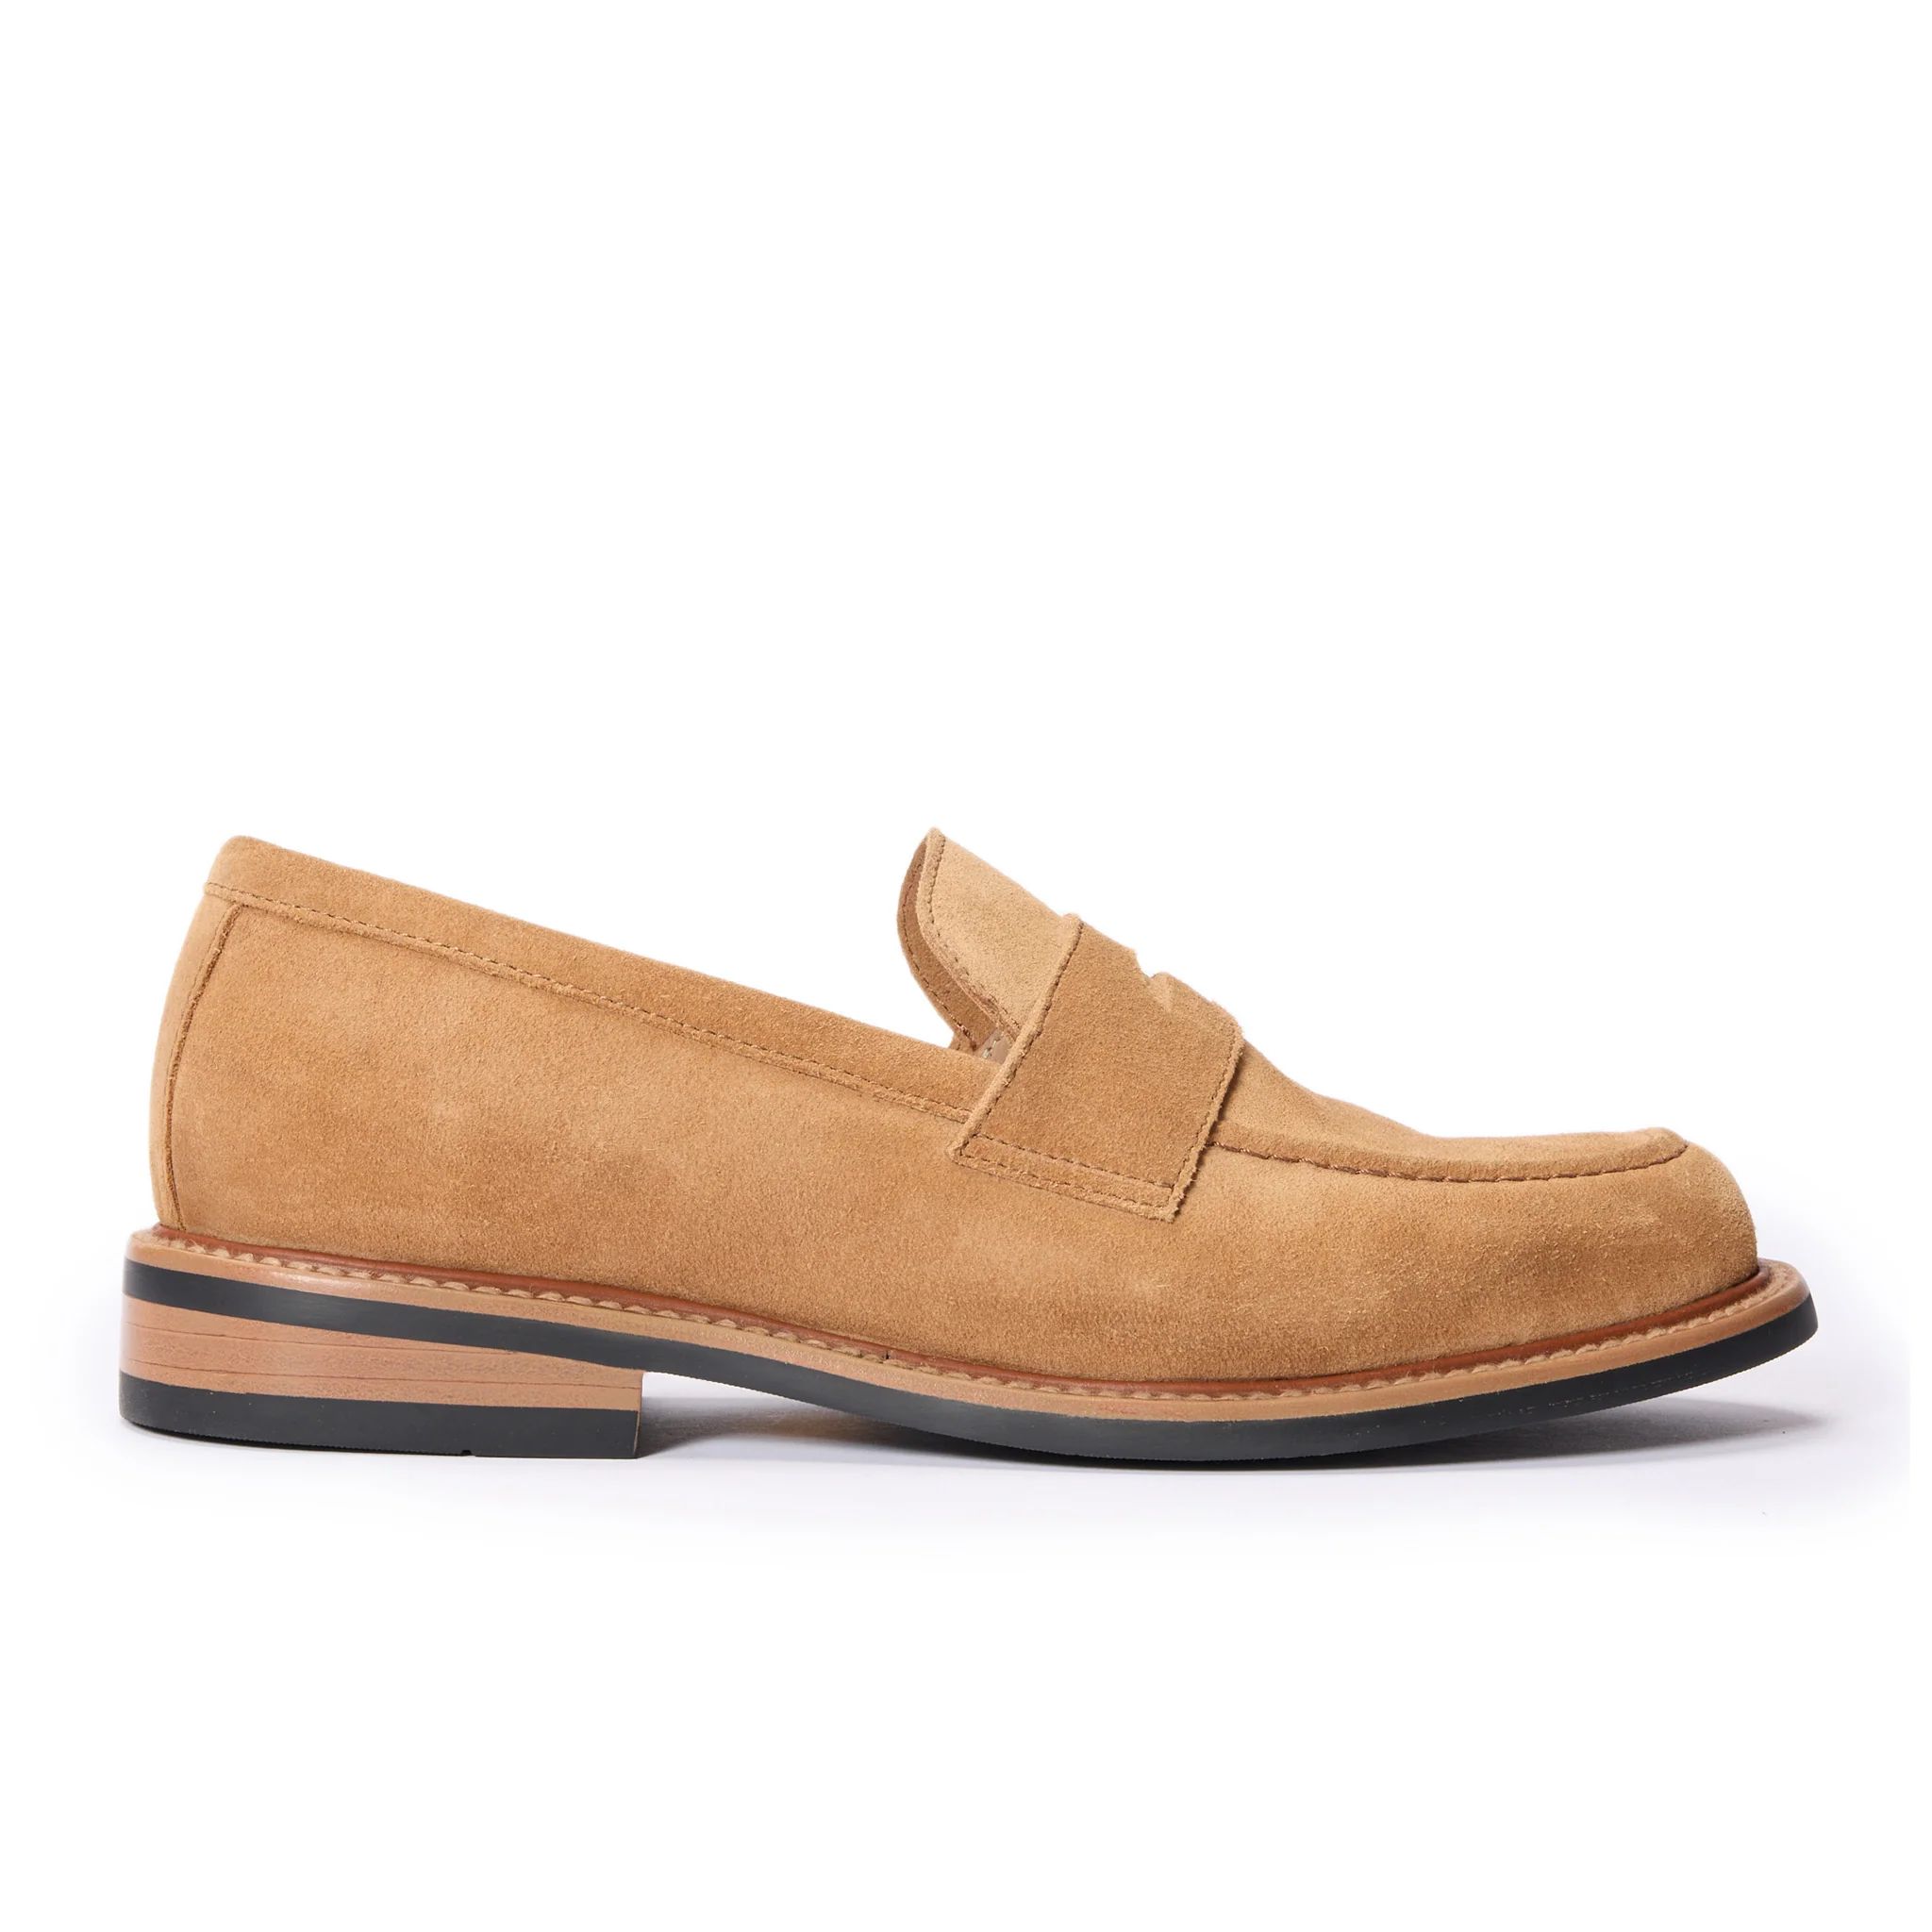 The Loafer in Tan Suede | Taylor Stitch